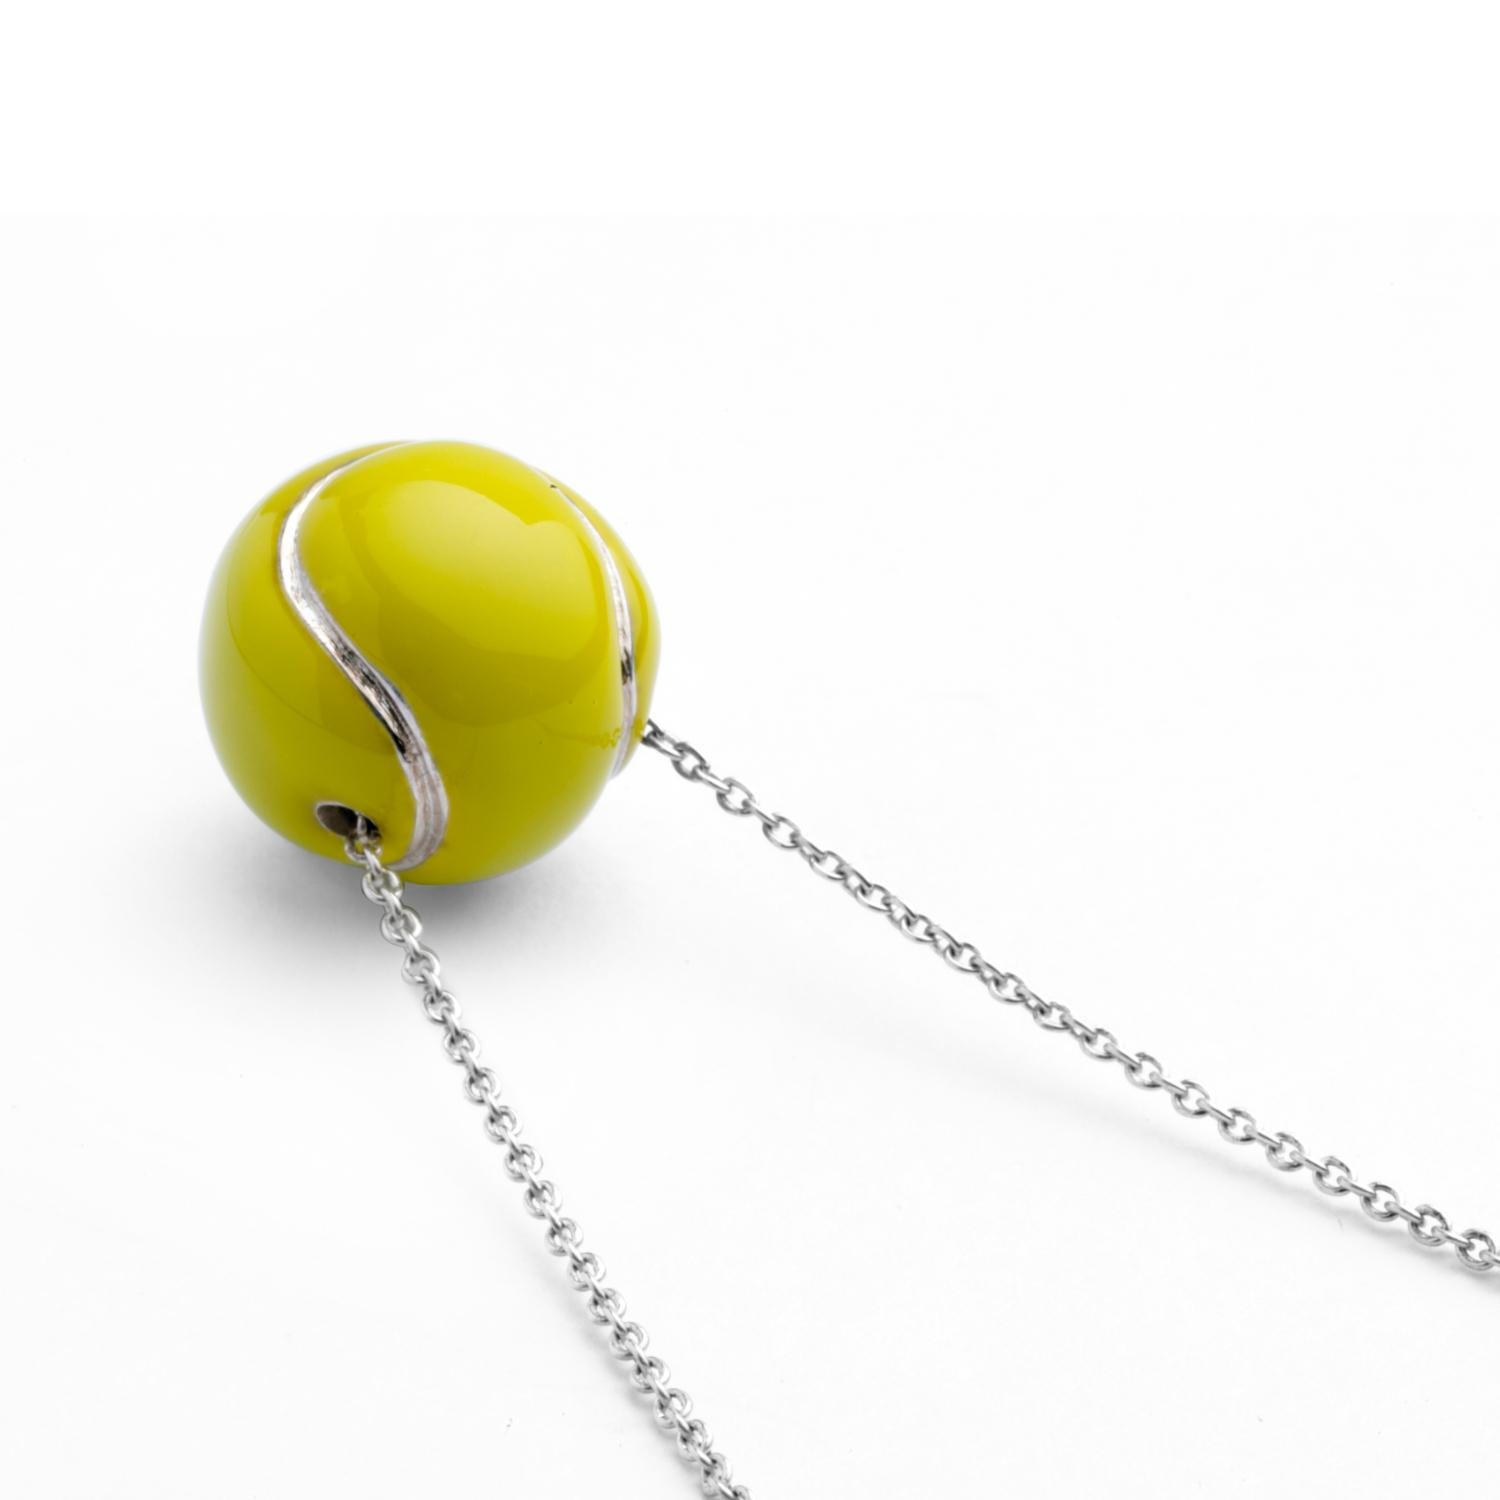 Contemporary Deakin & Francis Sterling Silver Tennis Ball Pendant